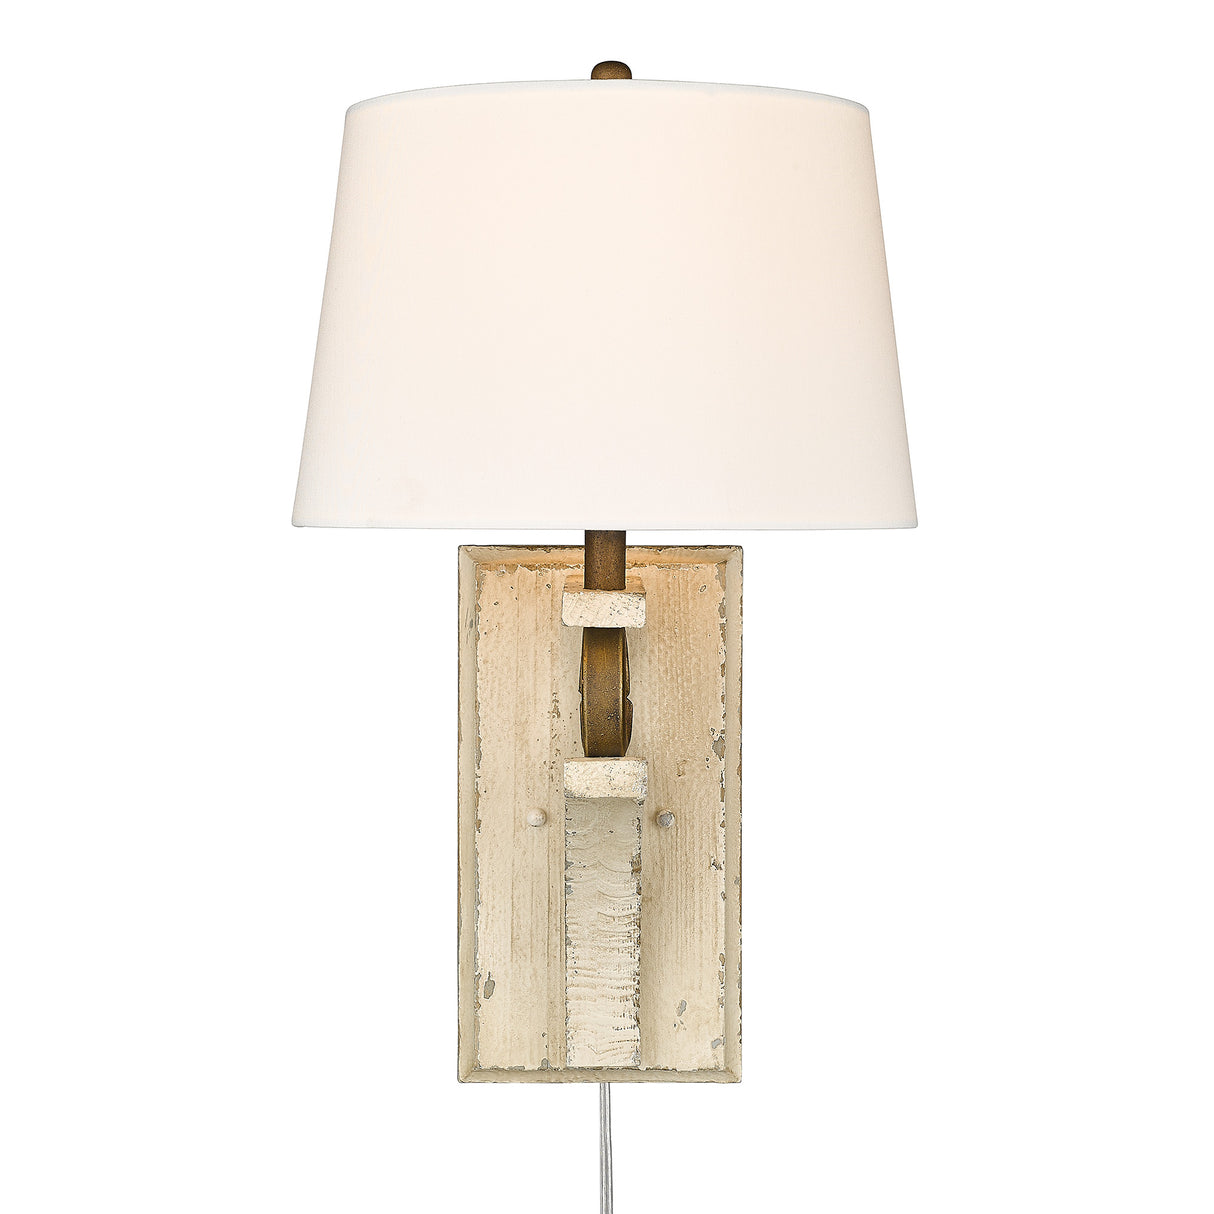 Solay 1 Light Wall Sconce (Plug-in or Hardwire) in Burnished Chestnut with Ivory Linen Shade